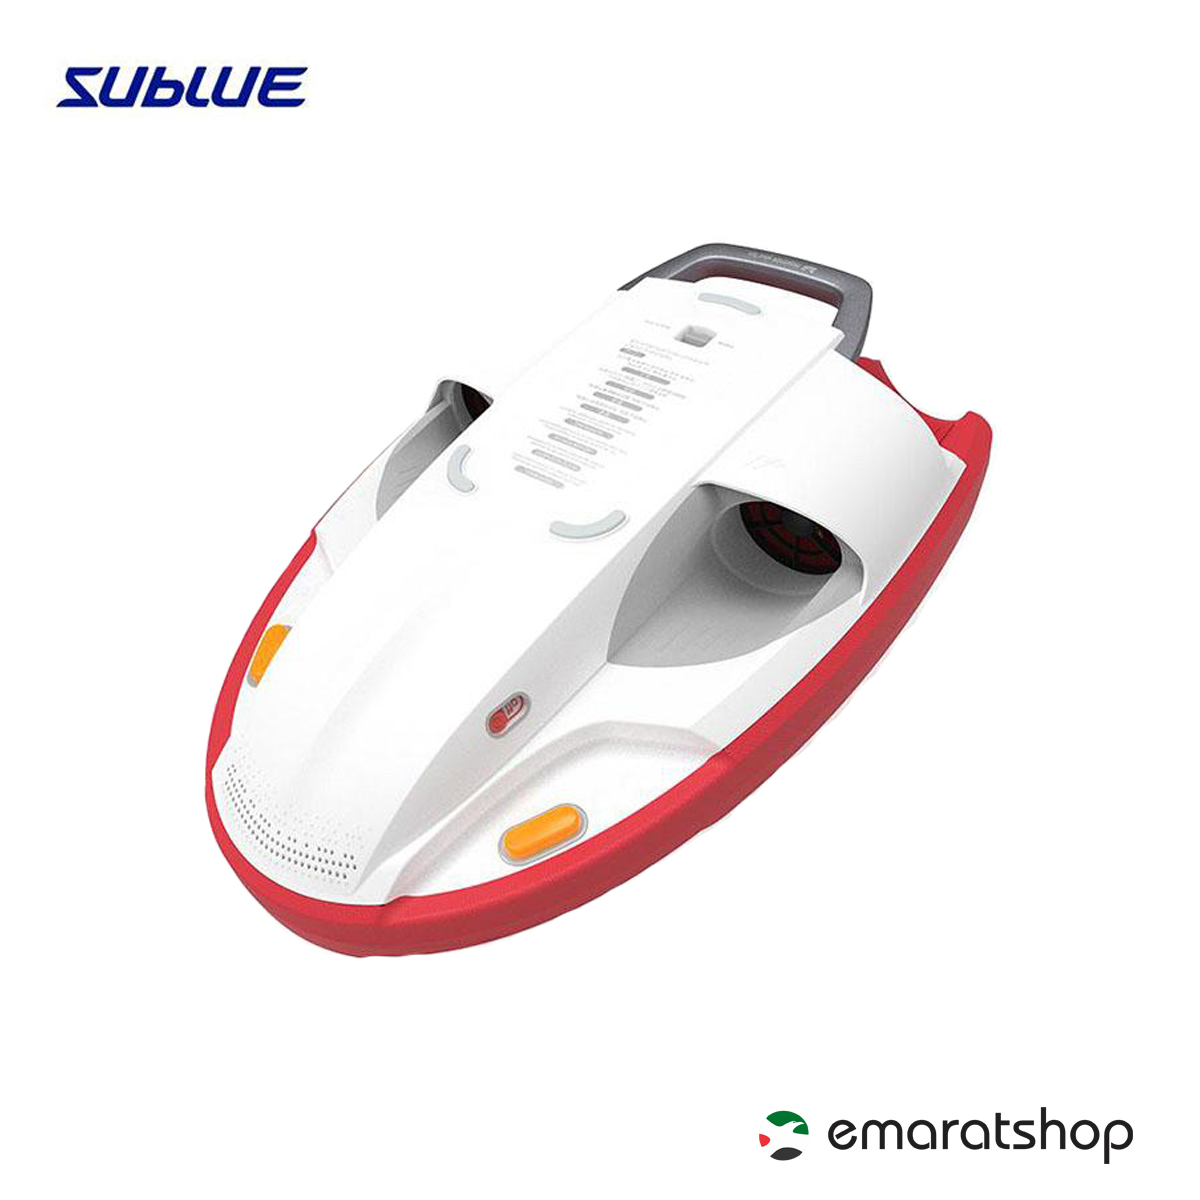 Sublue Swii Electronic Kickboard with Strong Buoyancy - Coral Red